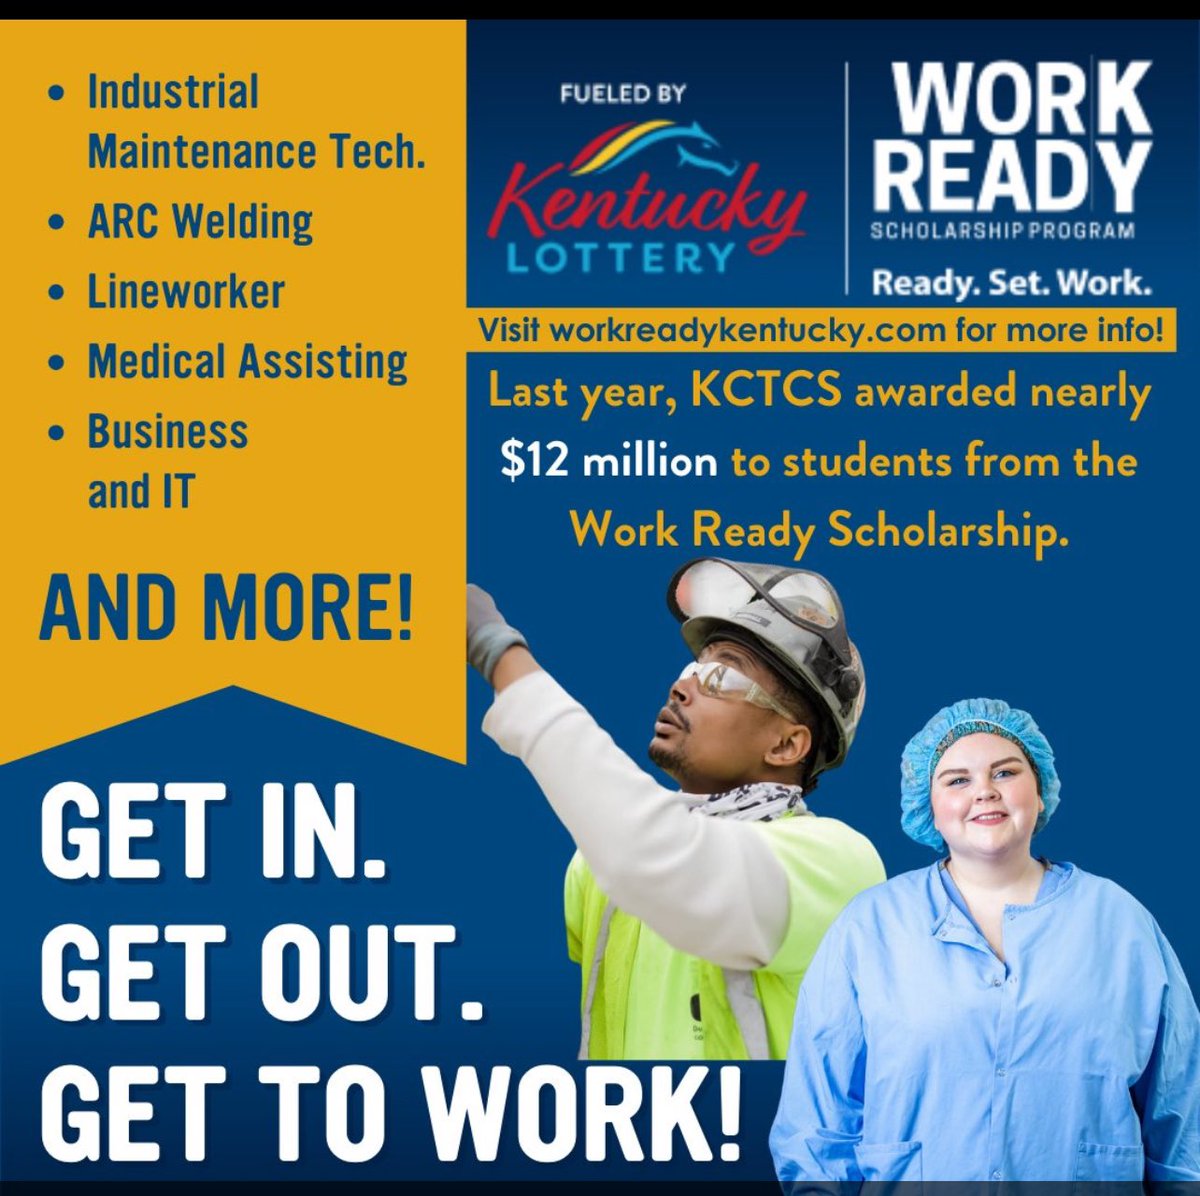 Searching for affordable education and a high paying job? Look no further. @KCTCS Work Ready Scholarship offers free tuition in high demand career fields. Get in, get out, get to work. @CPENews @KHEAA #KYGA24